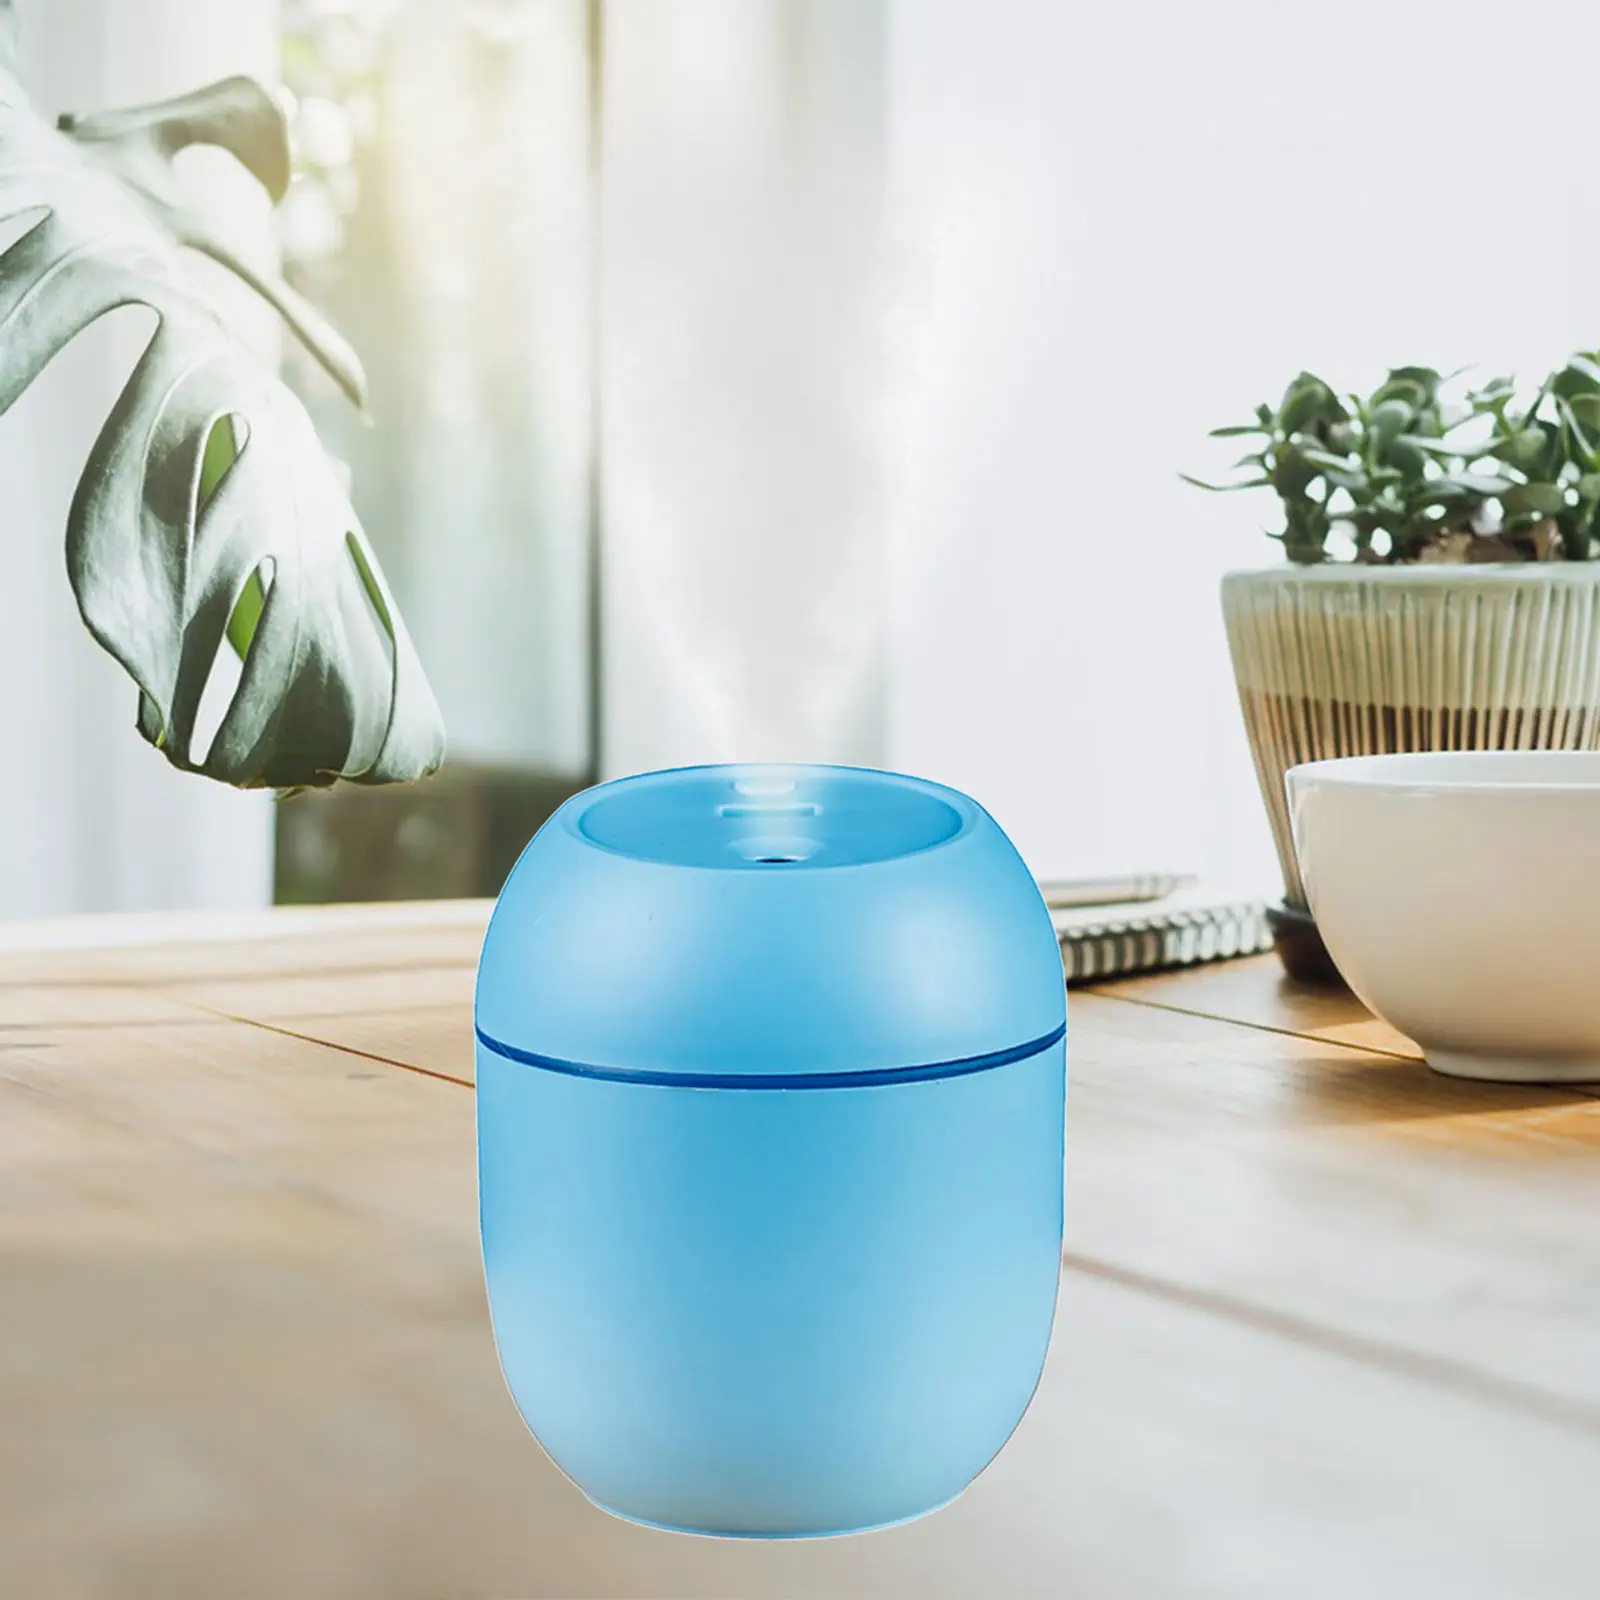 Portable USB Humidifier Cool Mist Humidifier with 7 LED Light Quiet Desktop Humidifier for Home Travel Office Auto Shut-Off